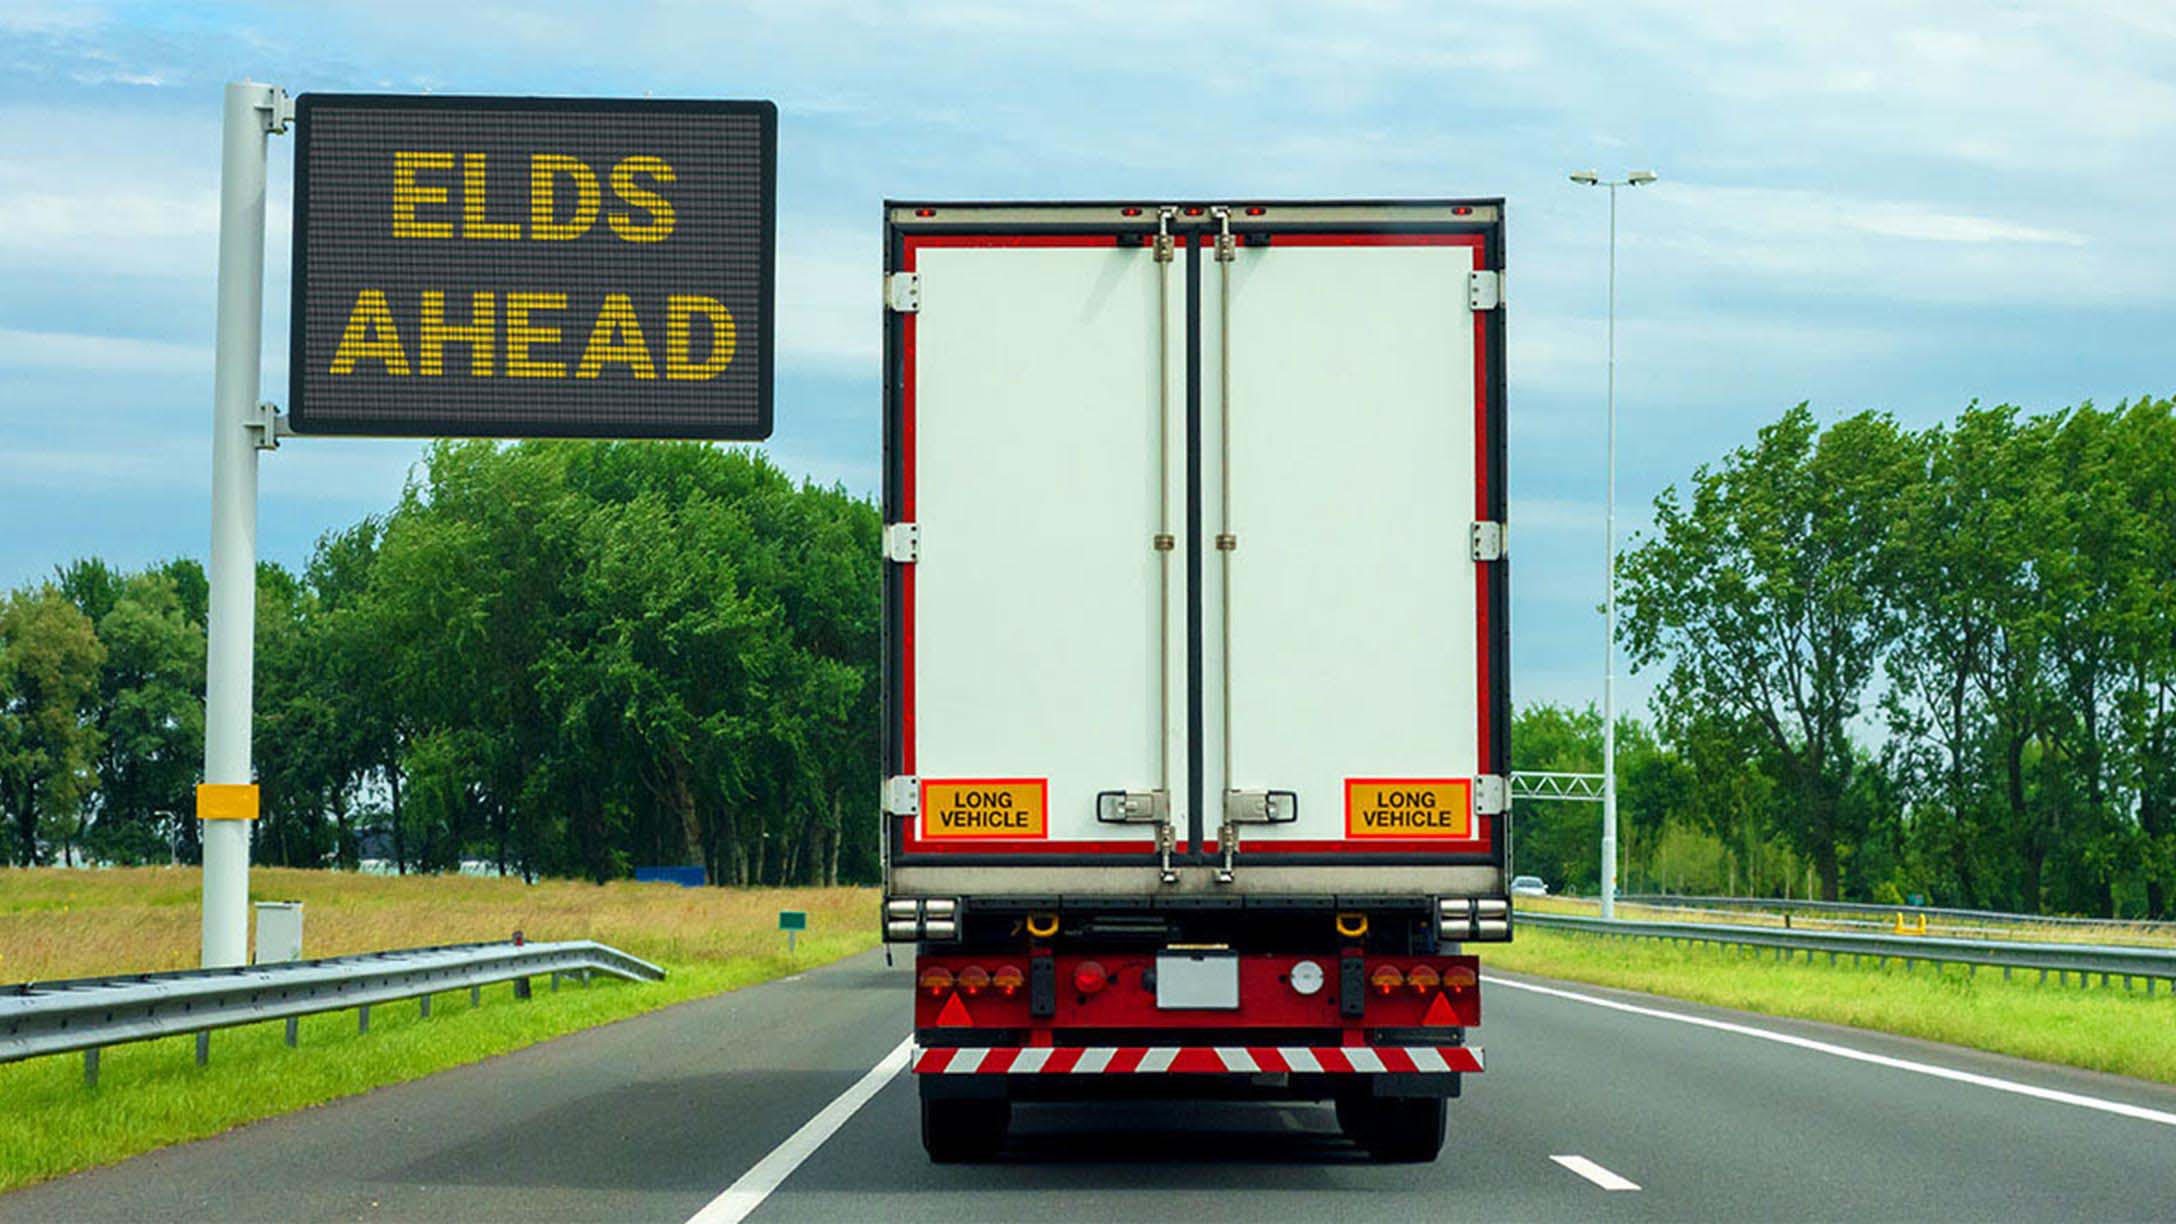 Back of a white transport truck on a road with a road sign saying "ELDS AHEAD"